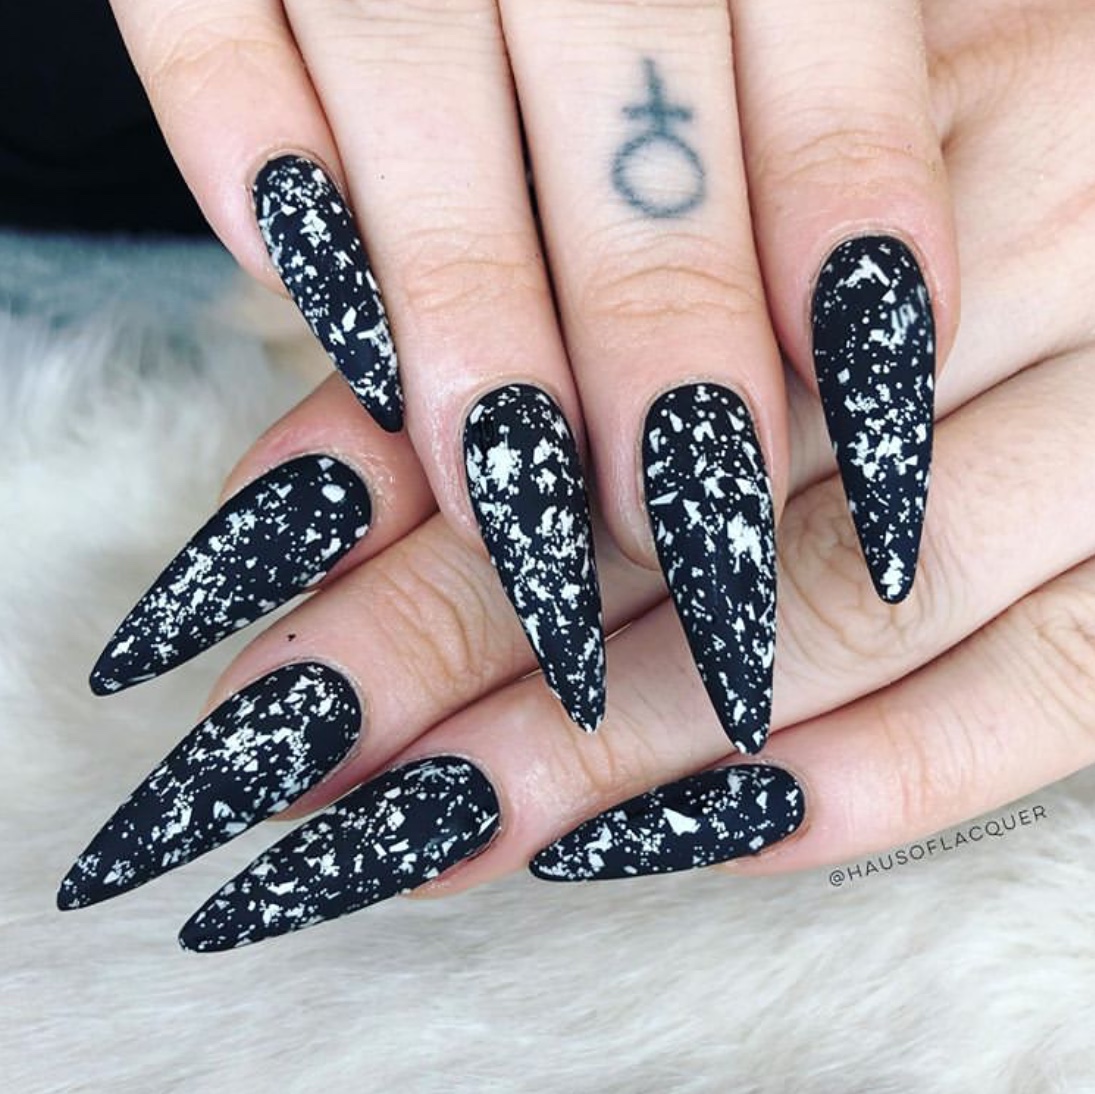 black and white nail designs